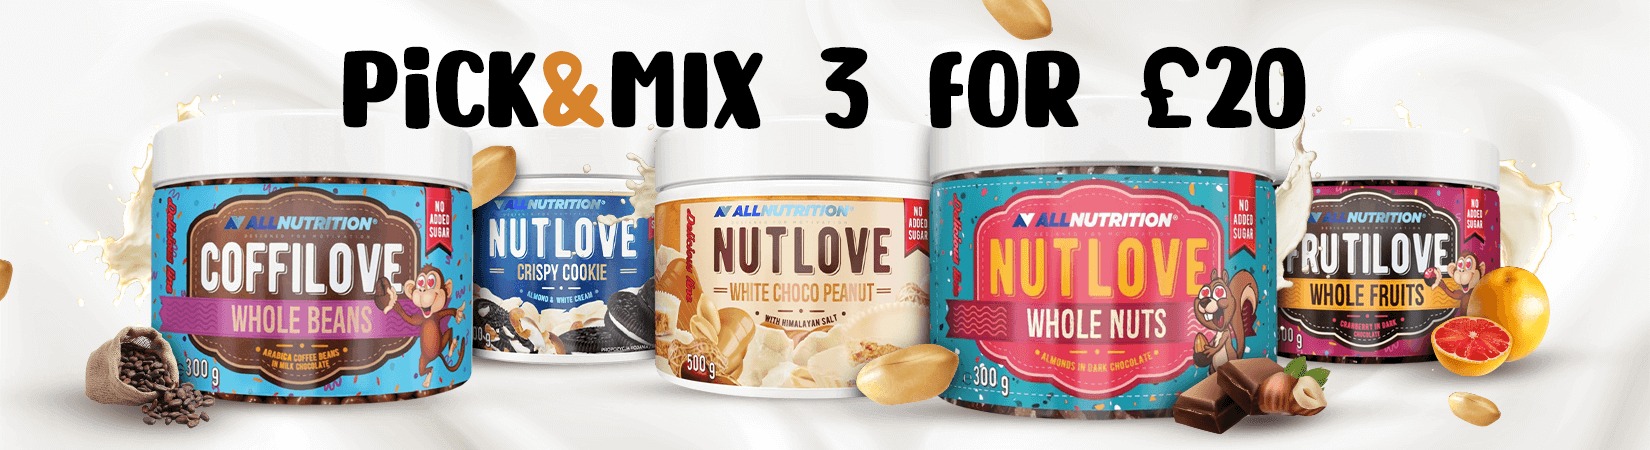 nutlove-pick-and-mix-all-flavours-allnutrition